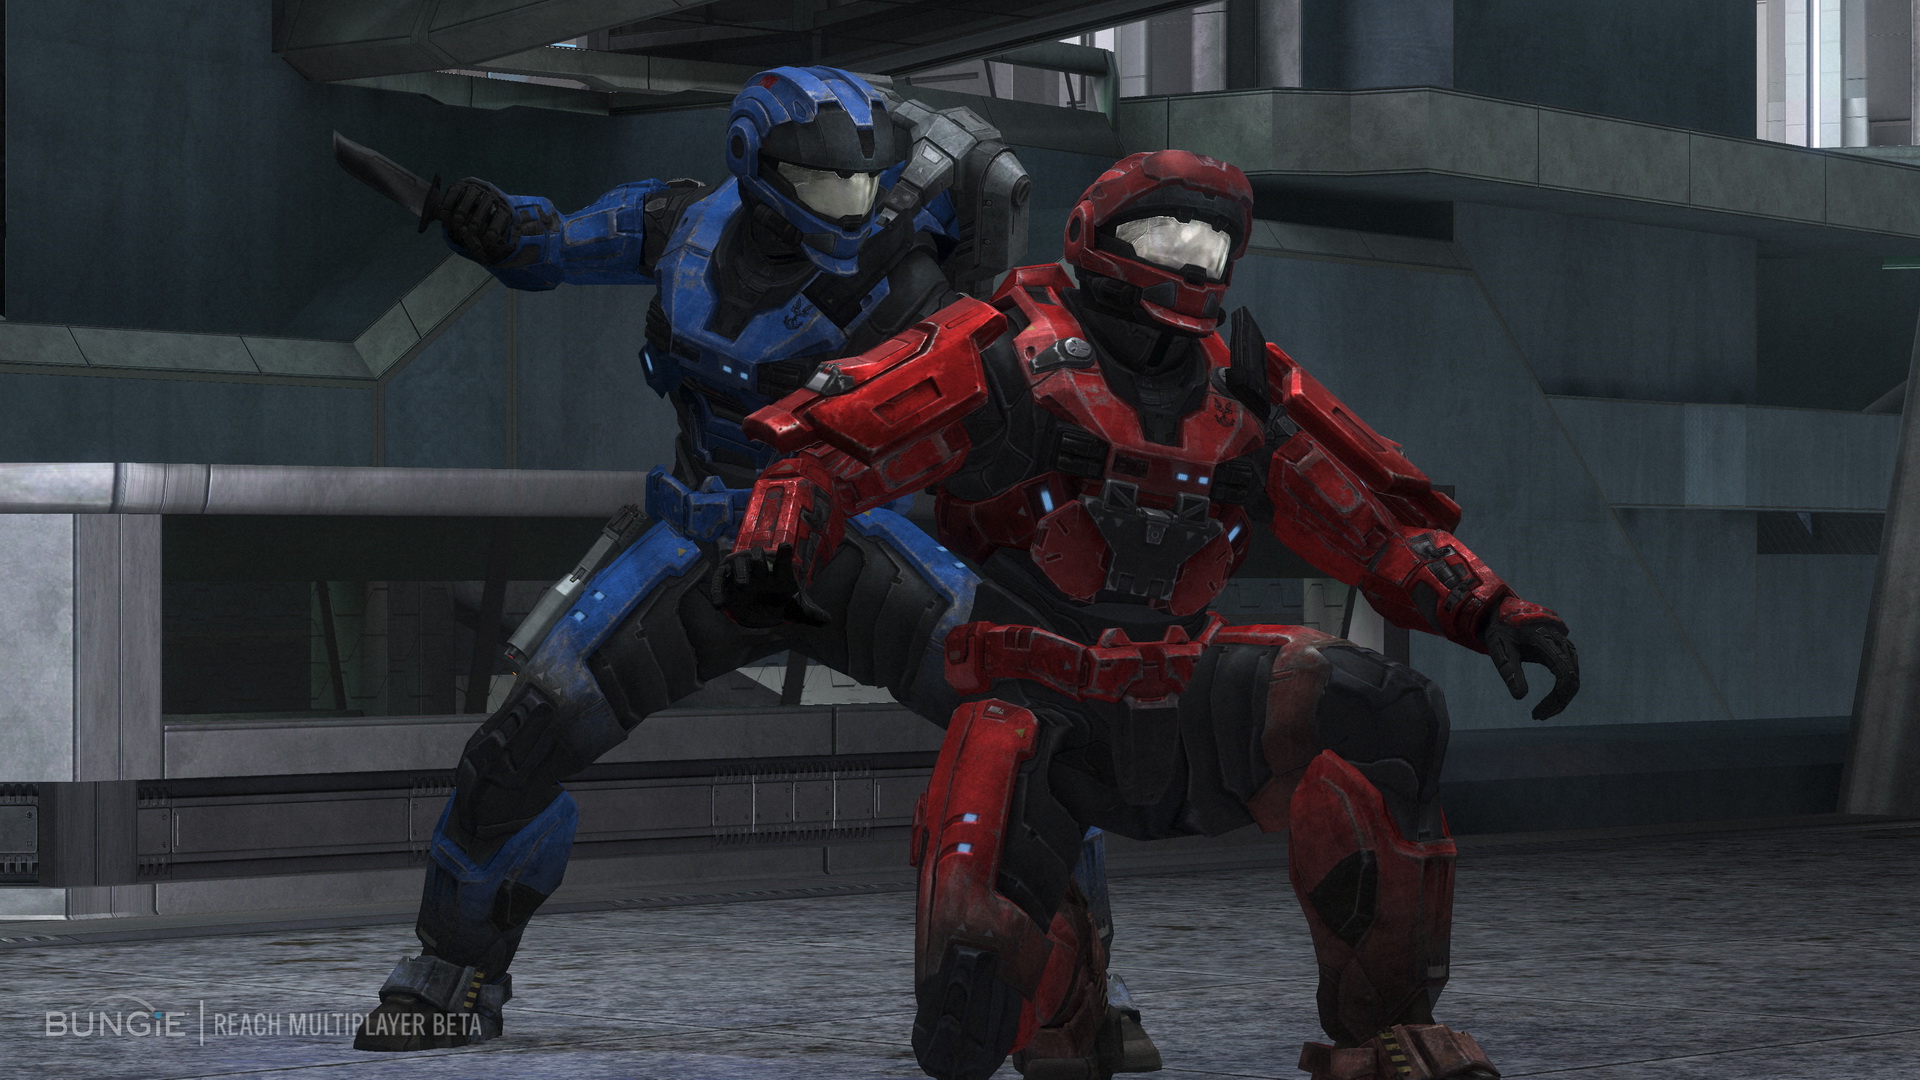 Halo: Reach Beta Winners Up In This Post! - Giant Bomb